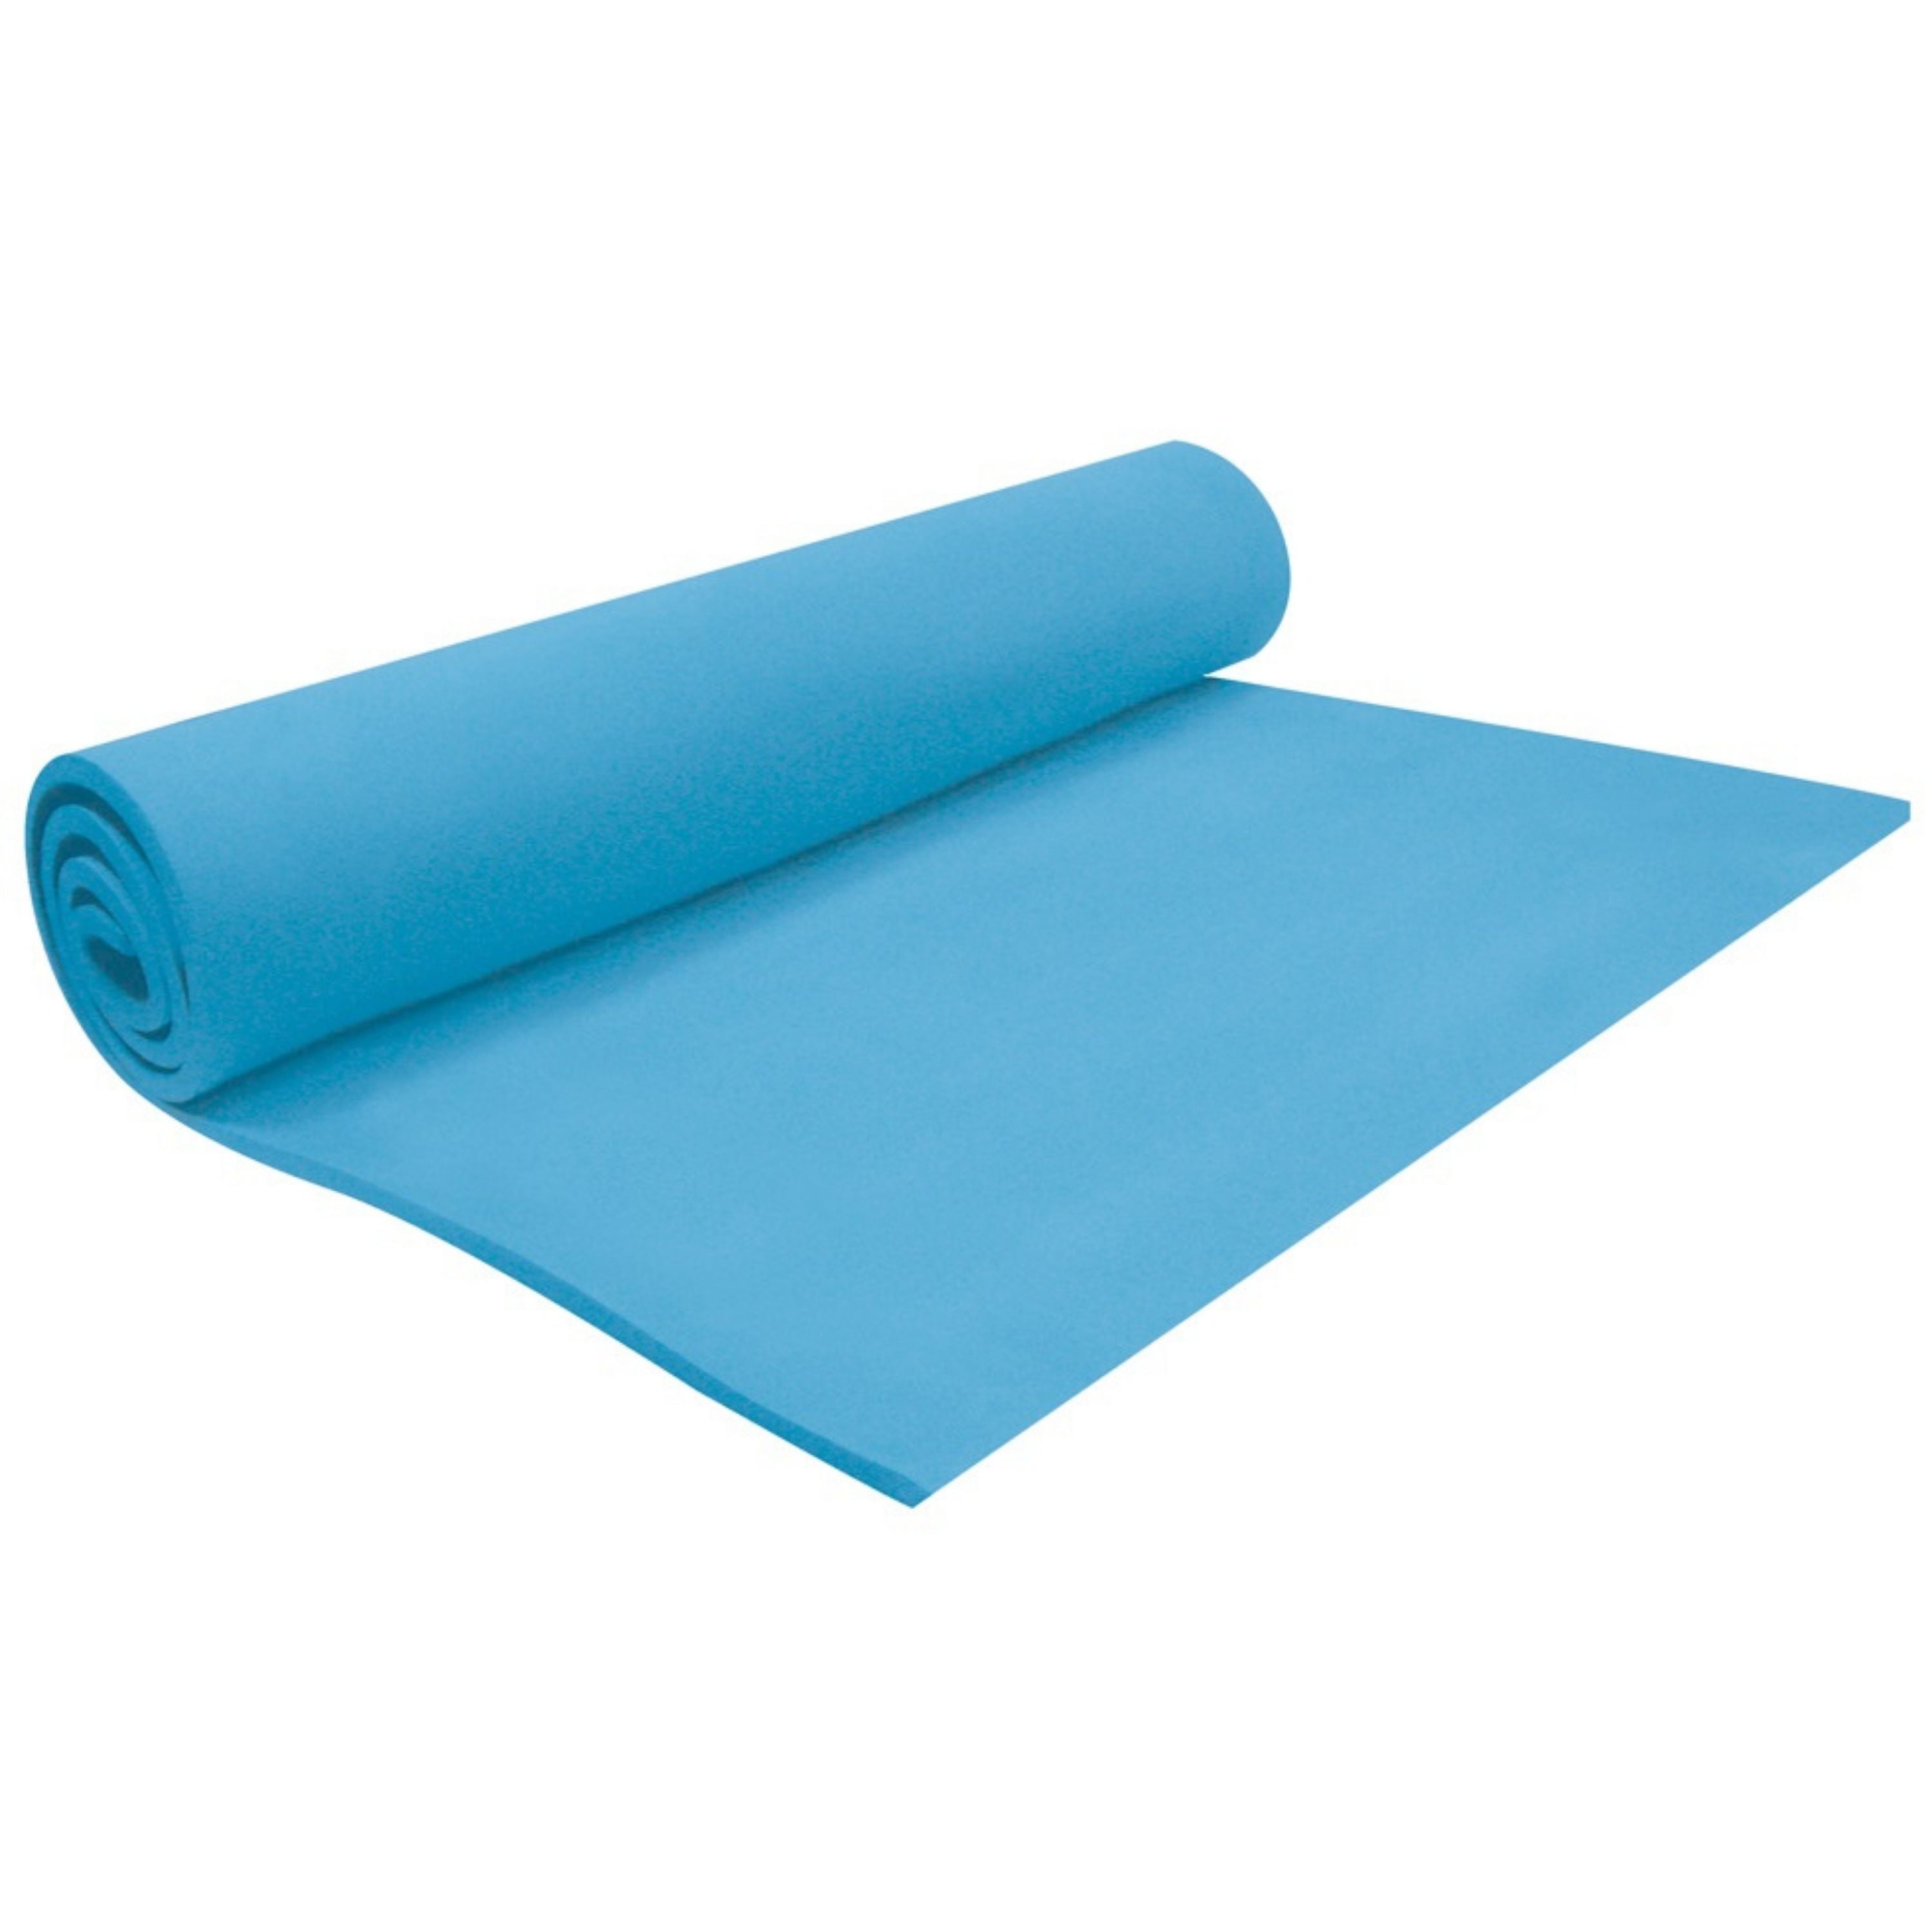 Matelas de camping et d'exercices simple 20X72||Single camping and exercise mattress 20 X 72